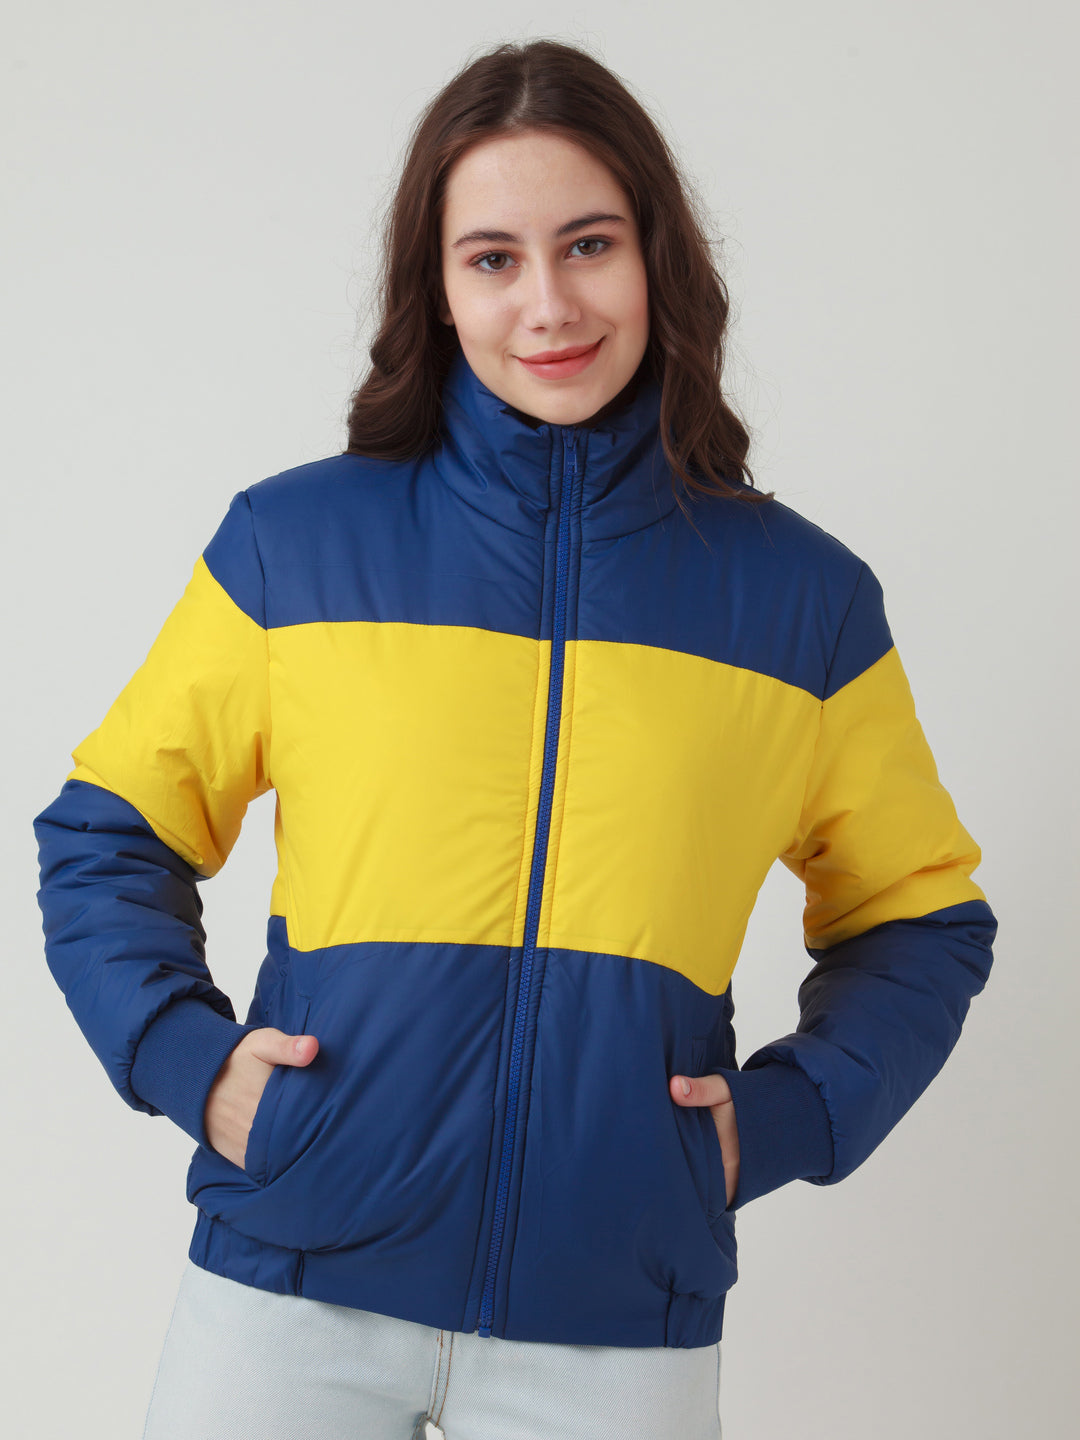 Multicolor Colourblocked Quilted Jacket For Women